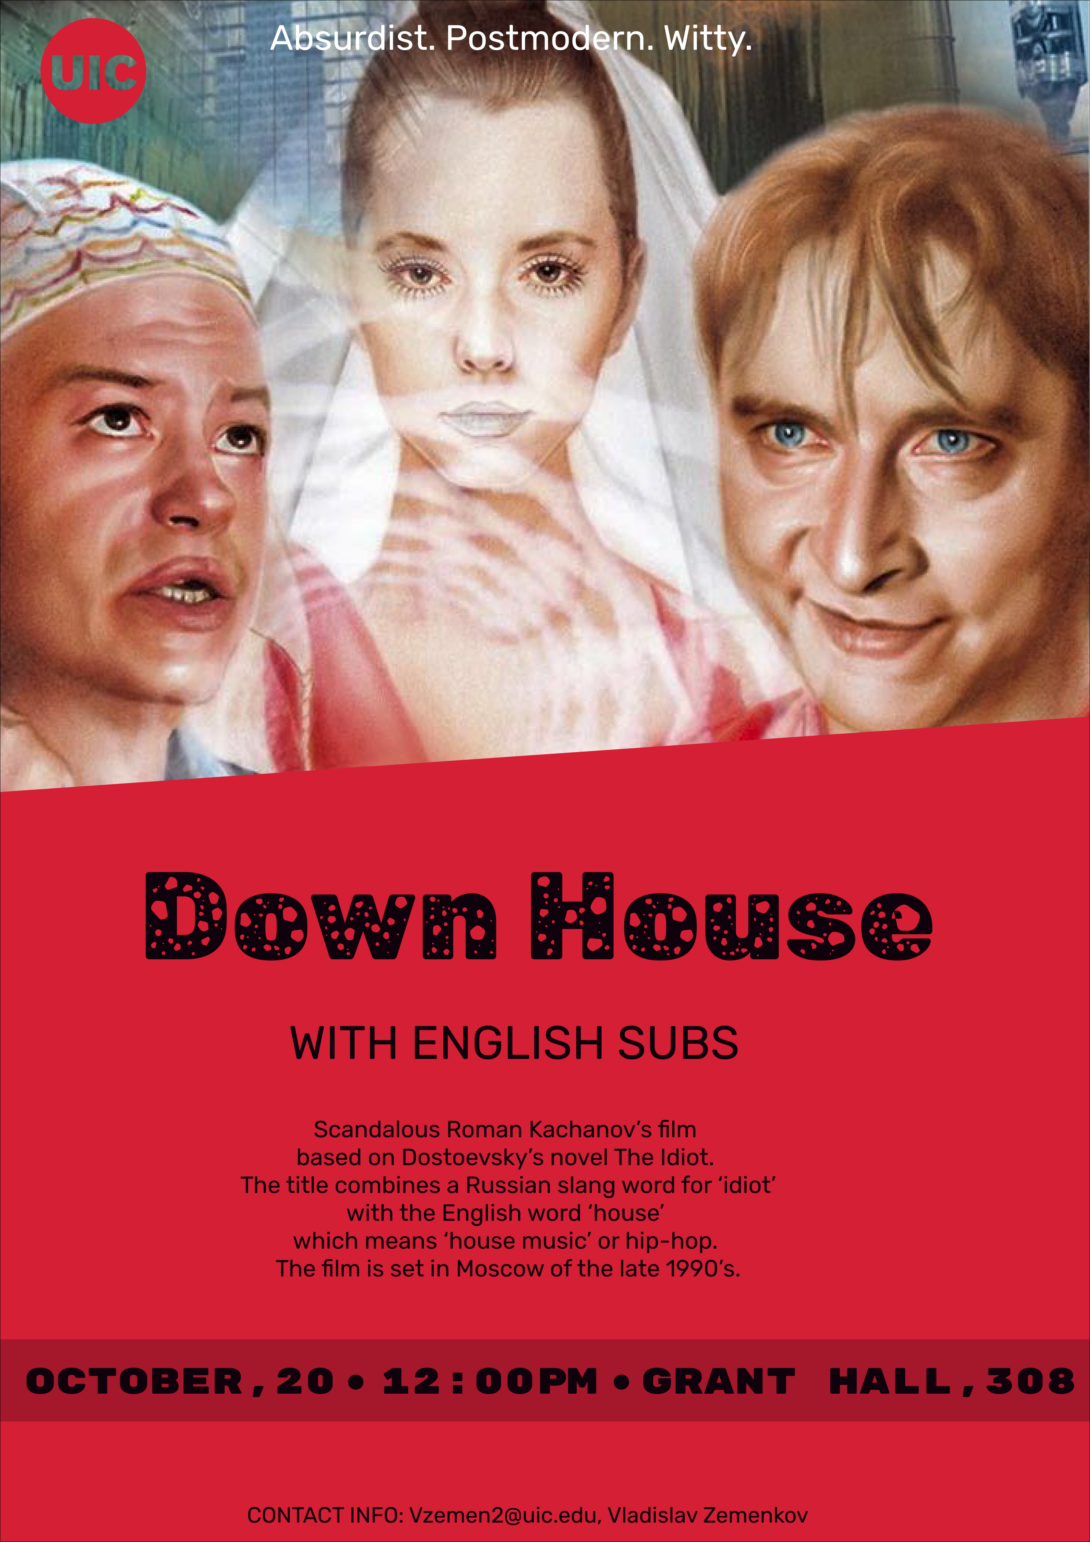 Absurd, Postmodern, Witty. Down House with English subs film poster.